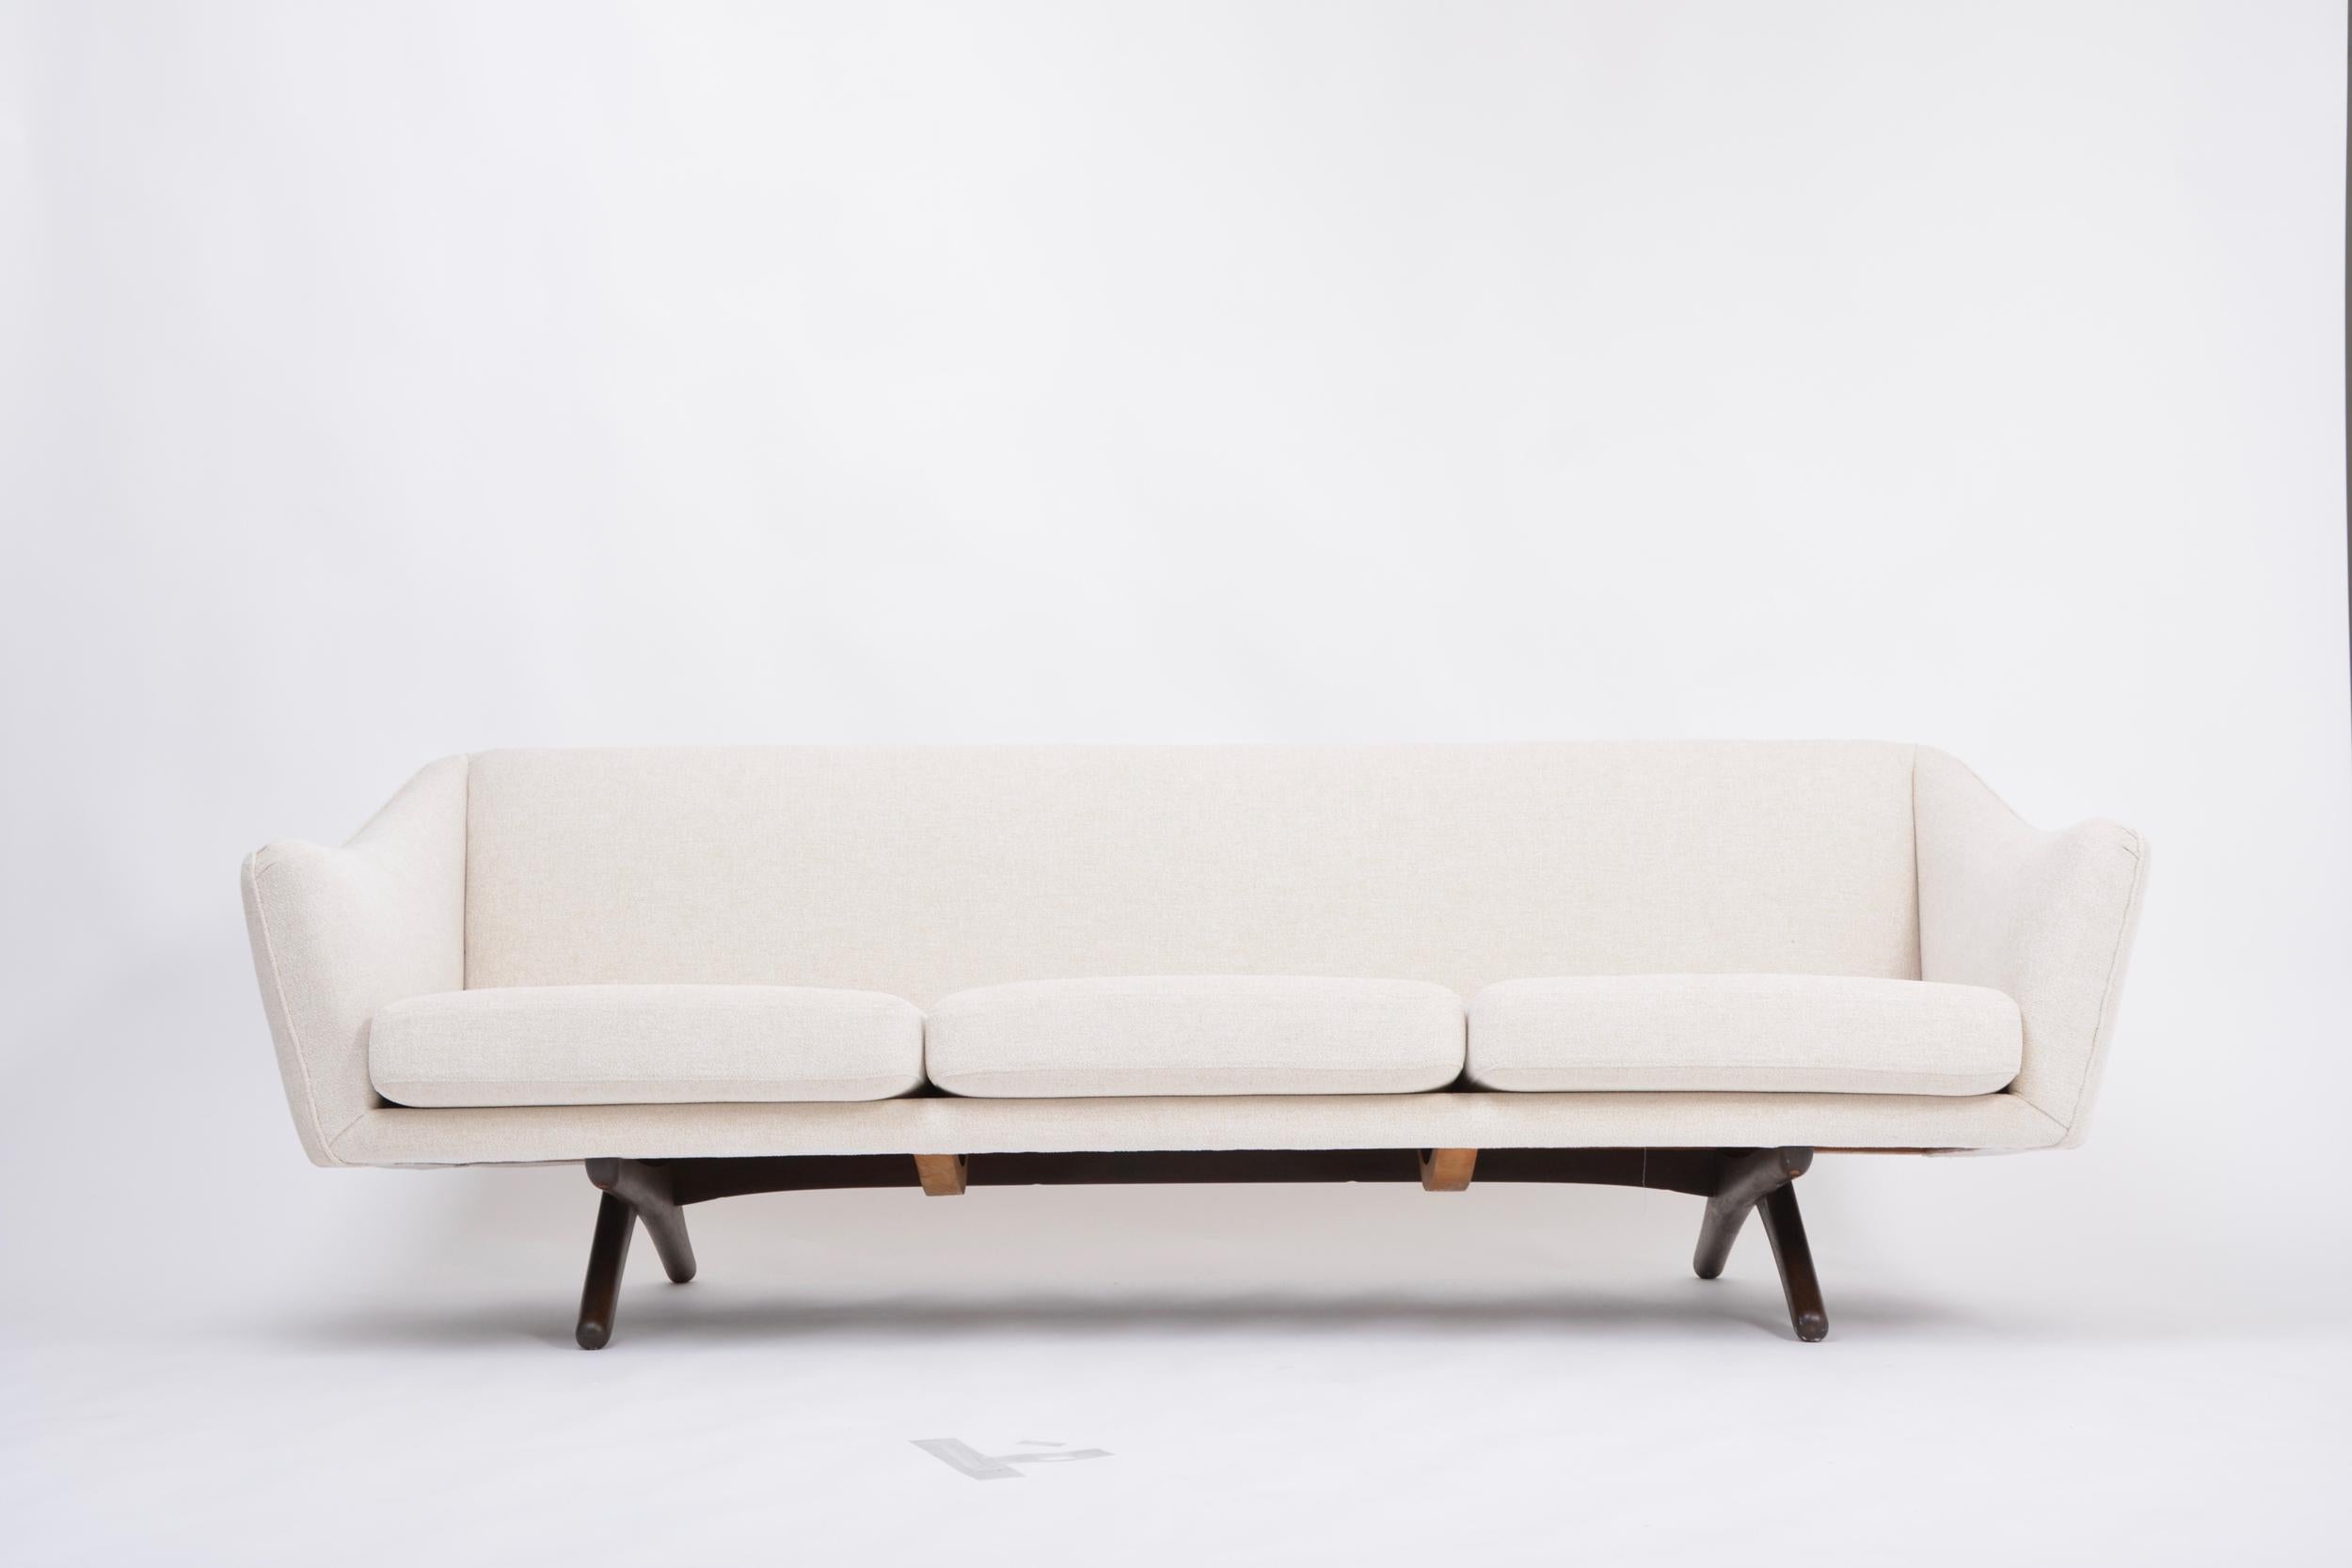 This three-seat sofa was designed by Danish designer Illum Wikkelsø and produced by Mikael Laursen in Denmark. One of the most beautiful sofa designs by Illum Wikkelso with exeptionally beautifully curved armrests and very interesting and unusually